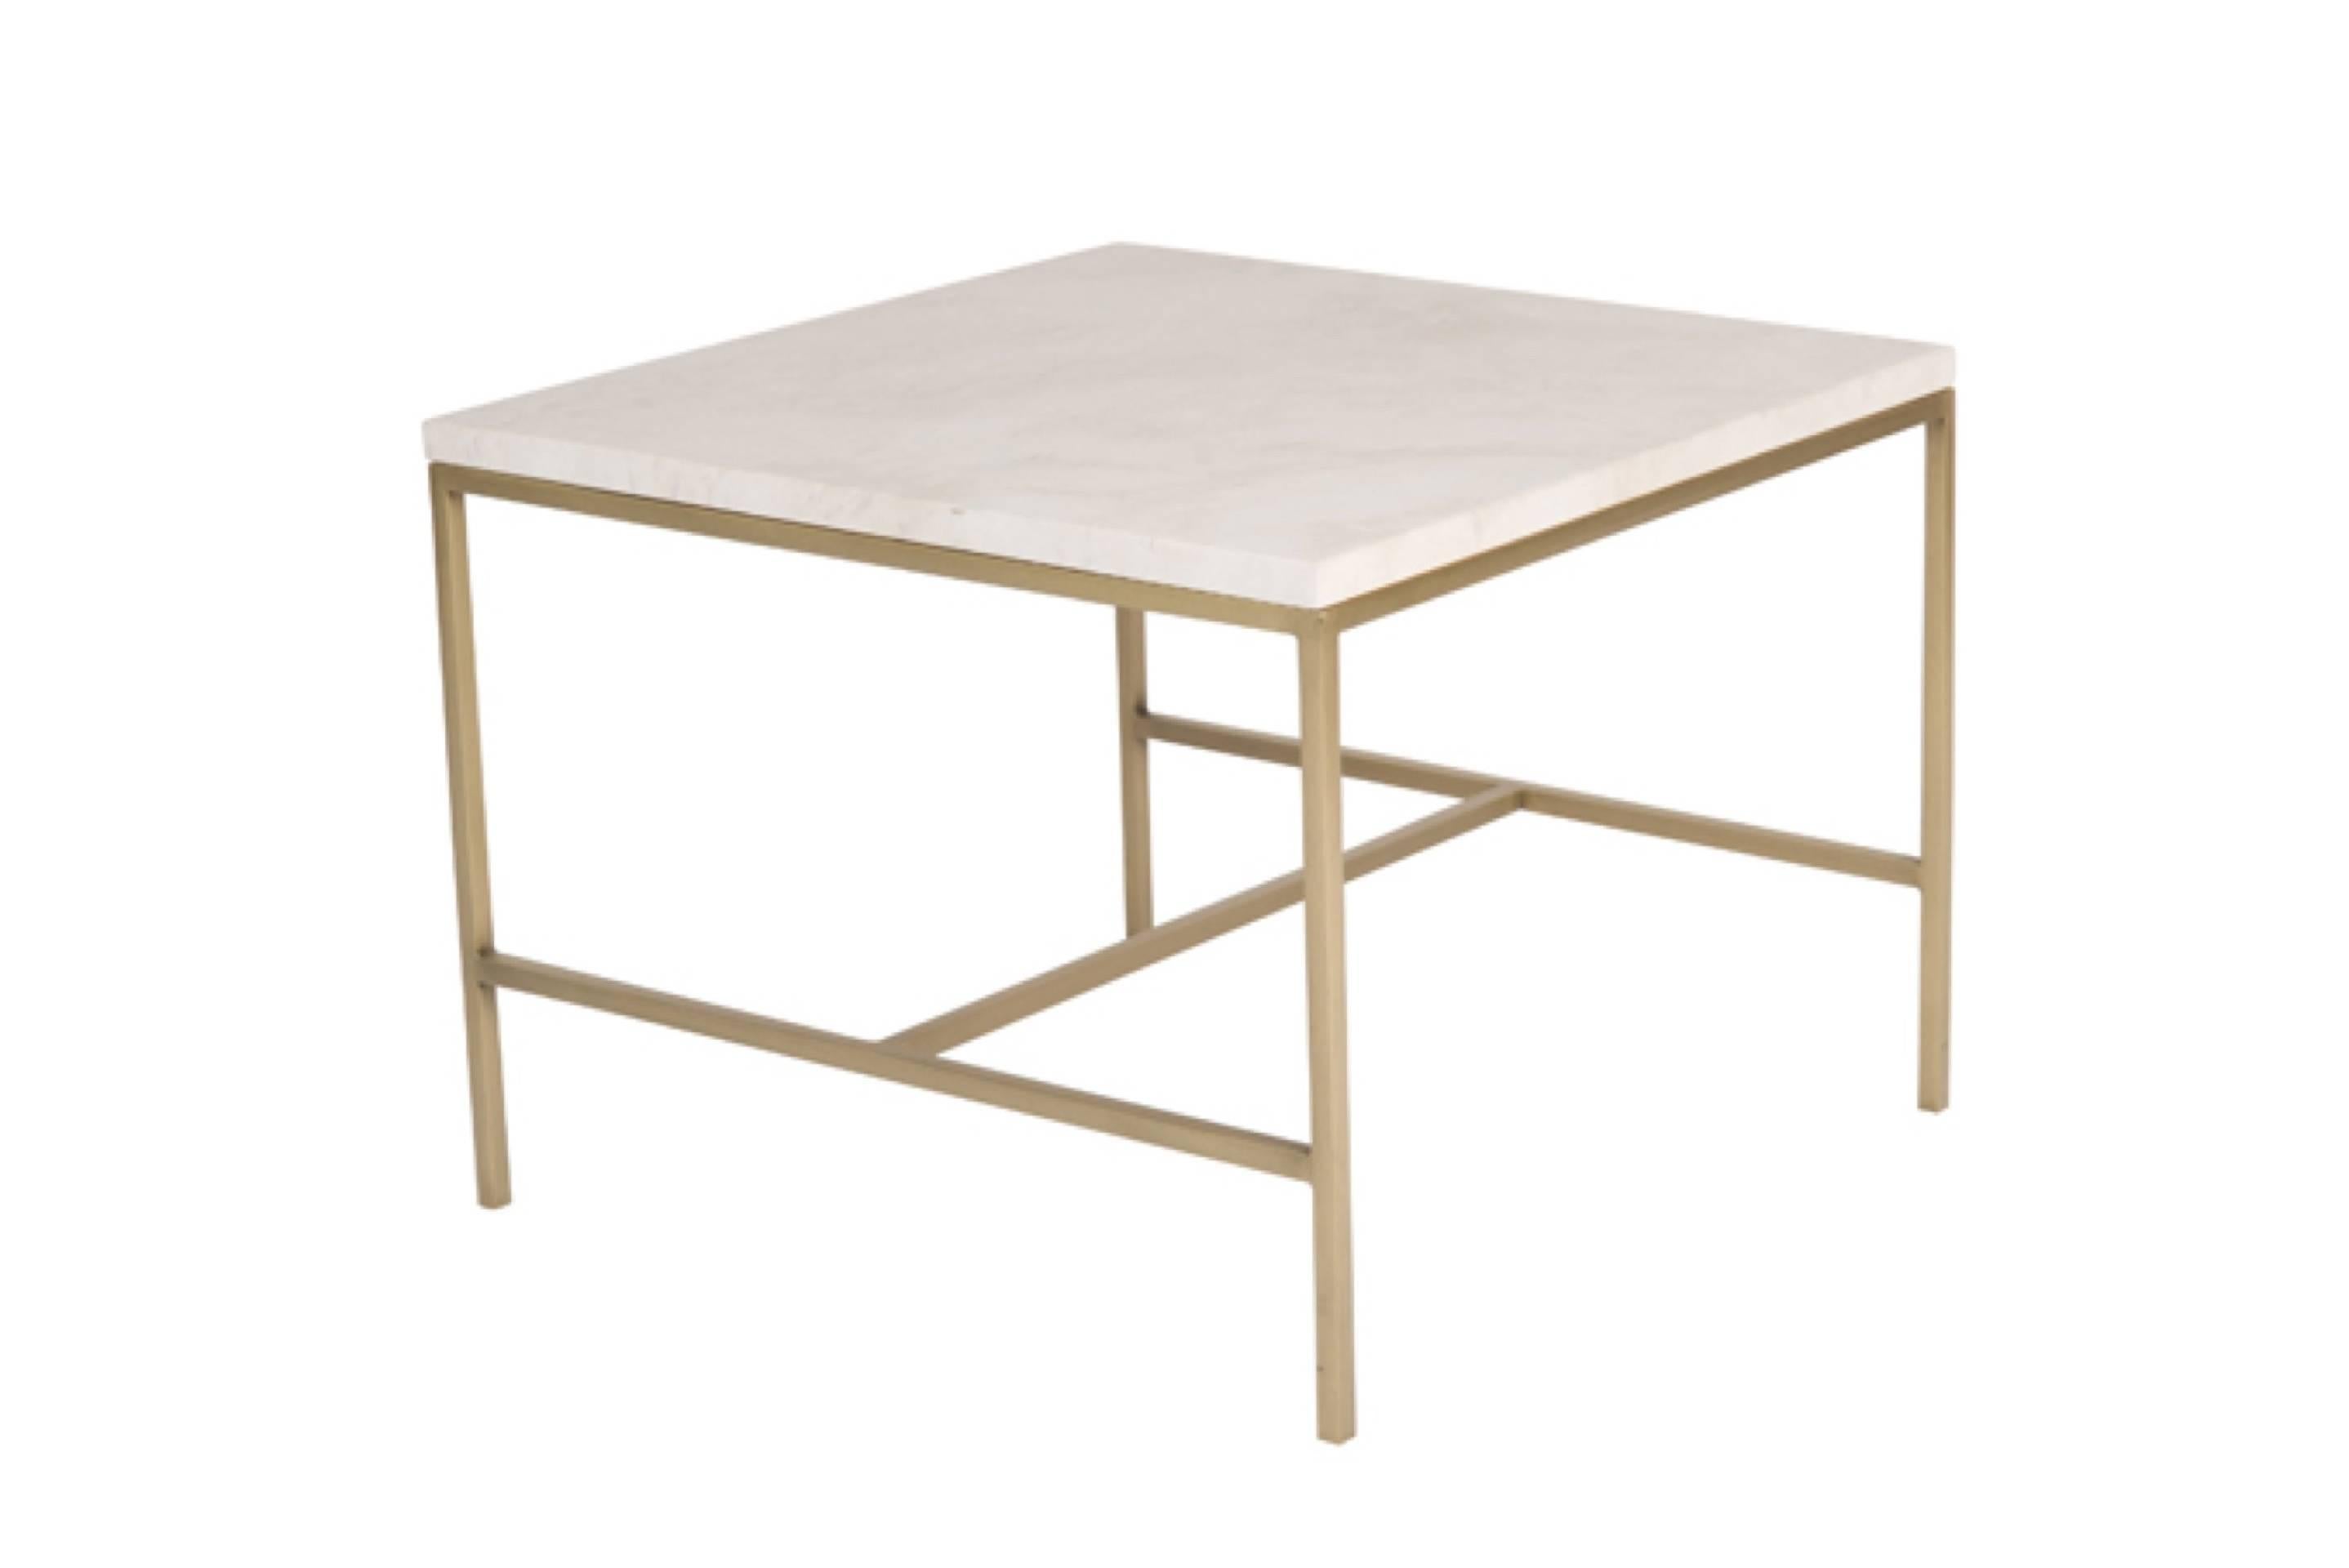 Brass frame H-base travertine top side table. Half inch square stock satin brass frame supports natural honed travertine top.

Custom orders have a lead time of 10-12 weeks FOB NYC. Lead time contingent upon selection of finishes, approval of shop